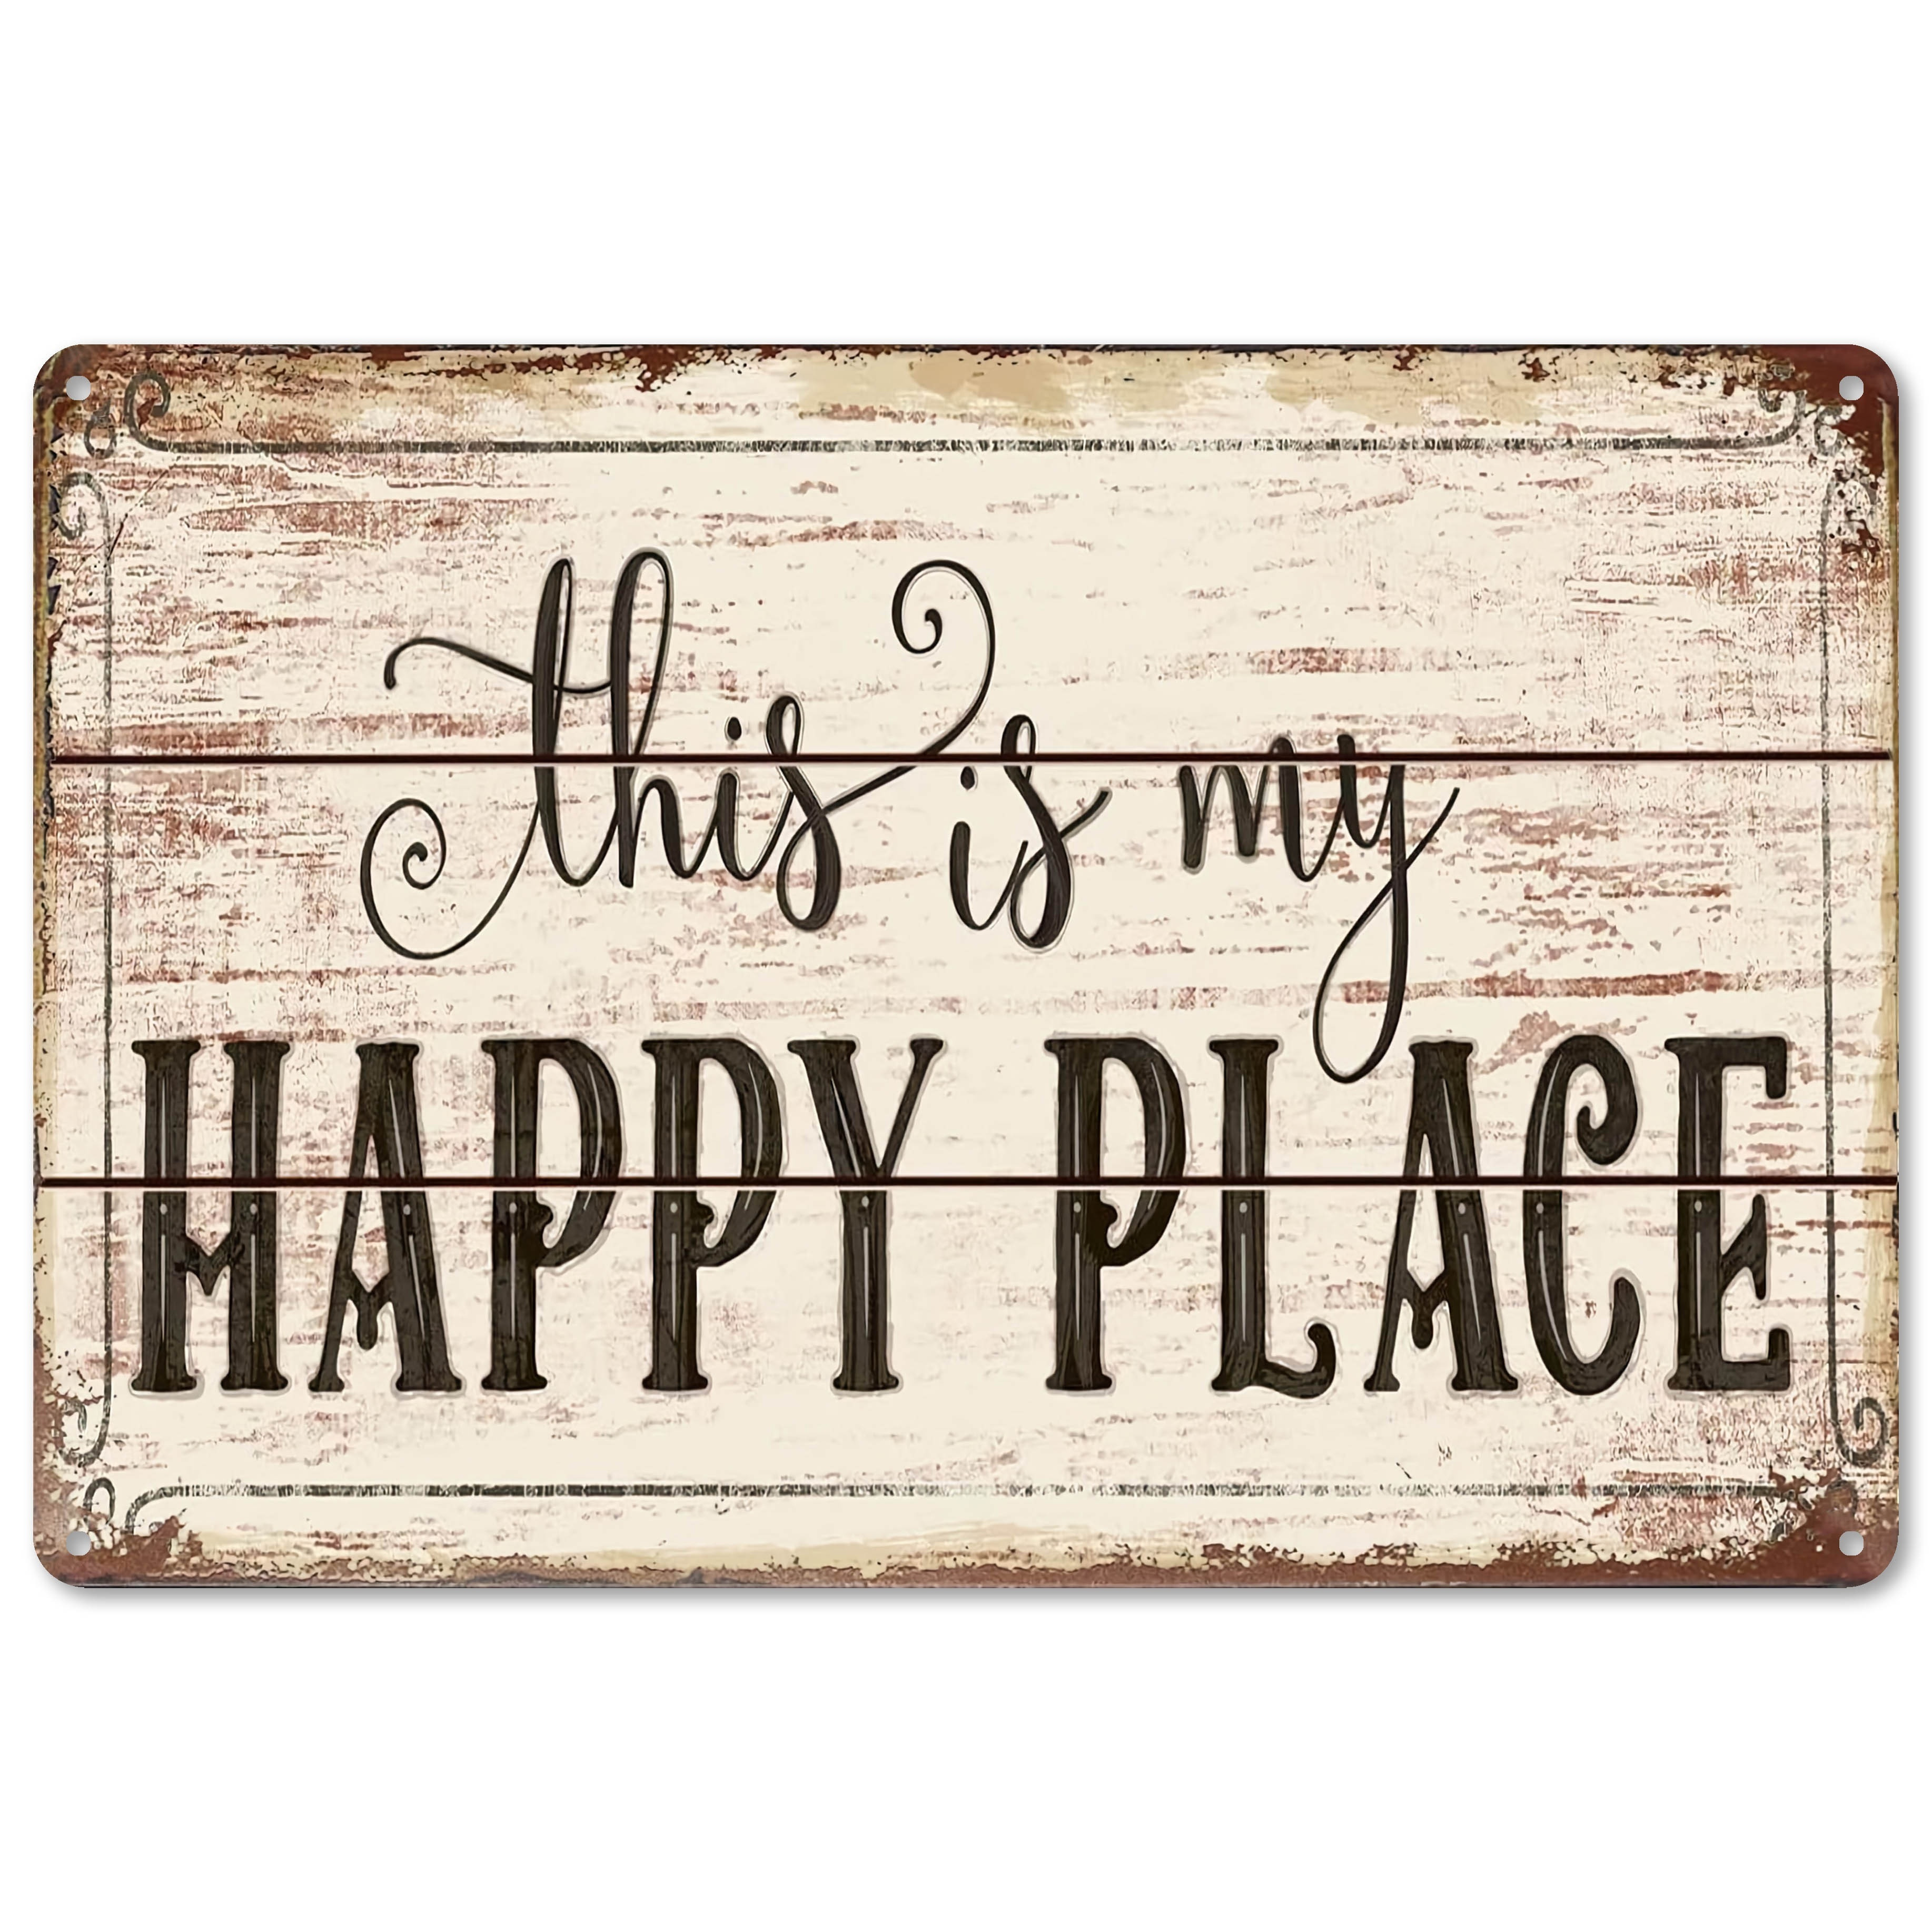 

1pc Retro Metal Aluminum Sign, This Is My Happy Place, Funny Tin Sign, Wall Art Decor, Vintage Garage Wall Decor, Restaurant Decoration, Cafe Bar Club Living Room Wall Decor Plaque, 8×12in